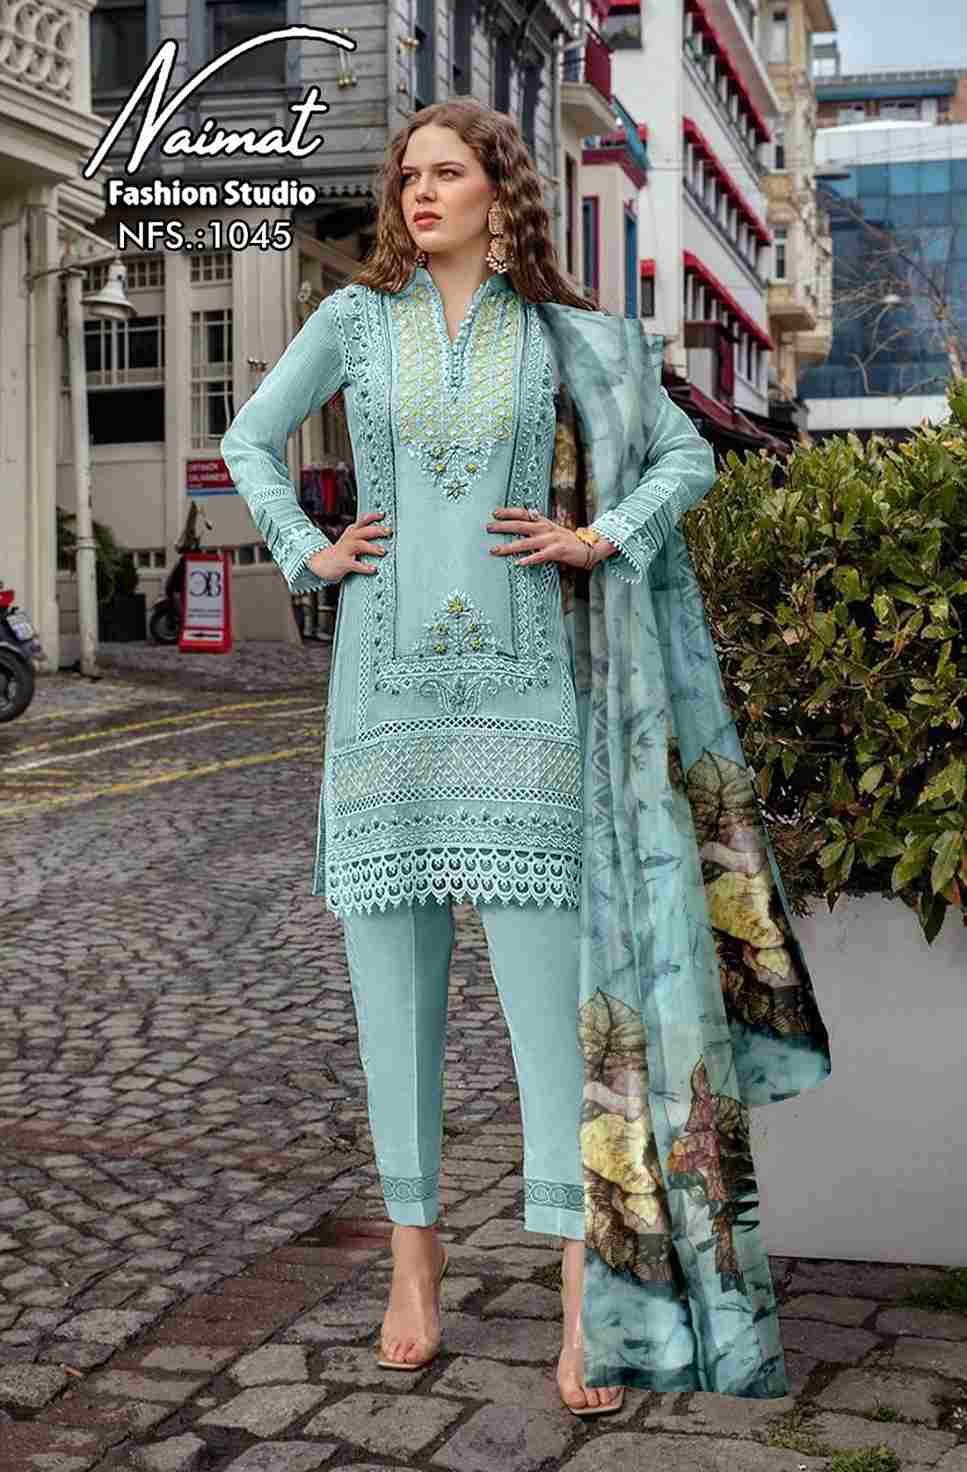 Naimat 1045 Colours By Naimat Fashion Studio 1045-A To 1045-D Series Beautiful Festive Suits Colorful Stylish Fancy Casual Wear & Ethnic Wear Pure Faux Dresses At Wholesale Price